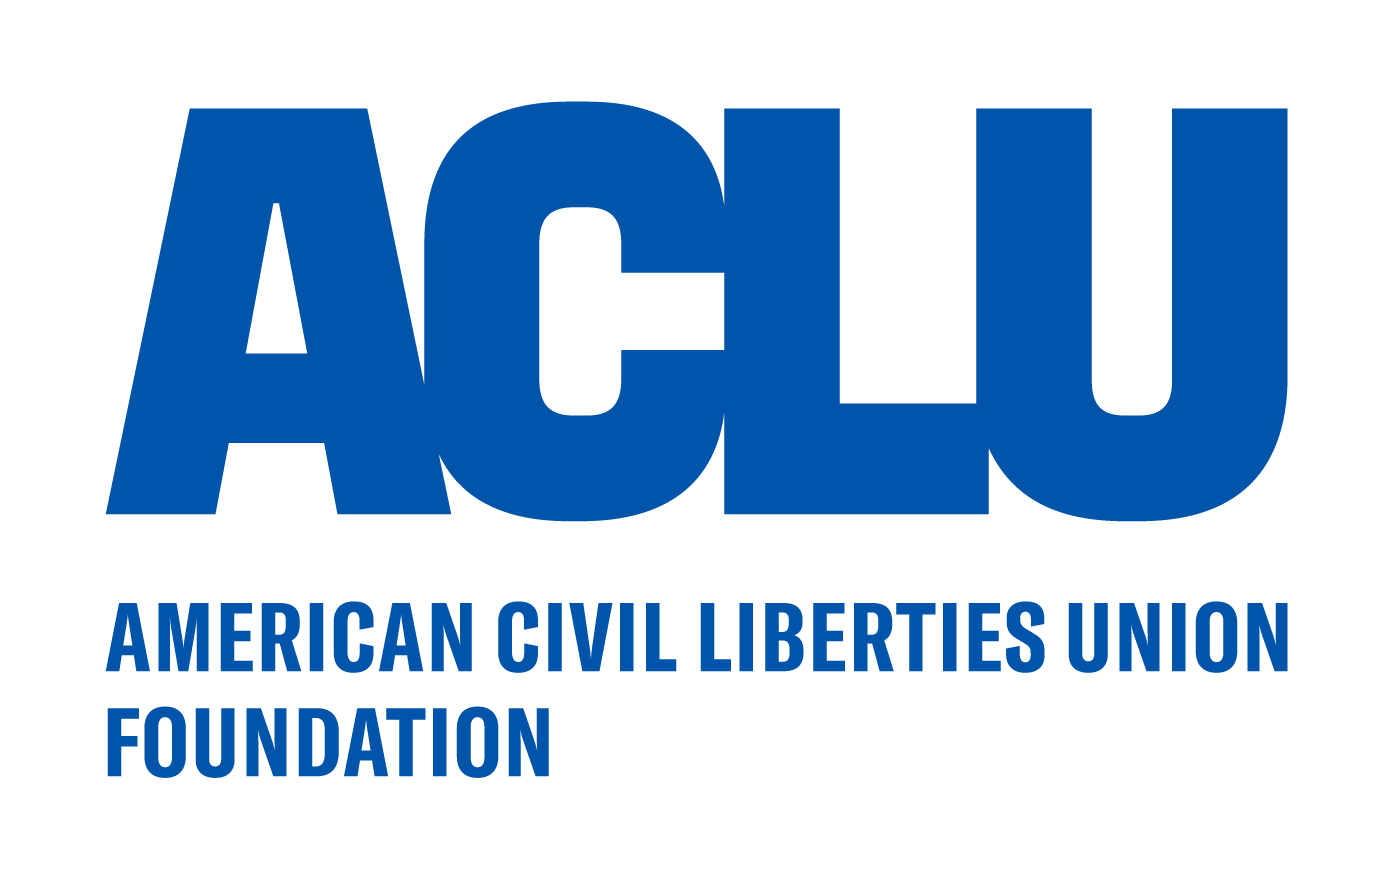 U.S. non-profit ACLU sues FBI for information about iPhone encryption breaking capabilities